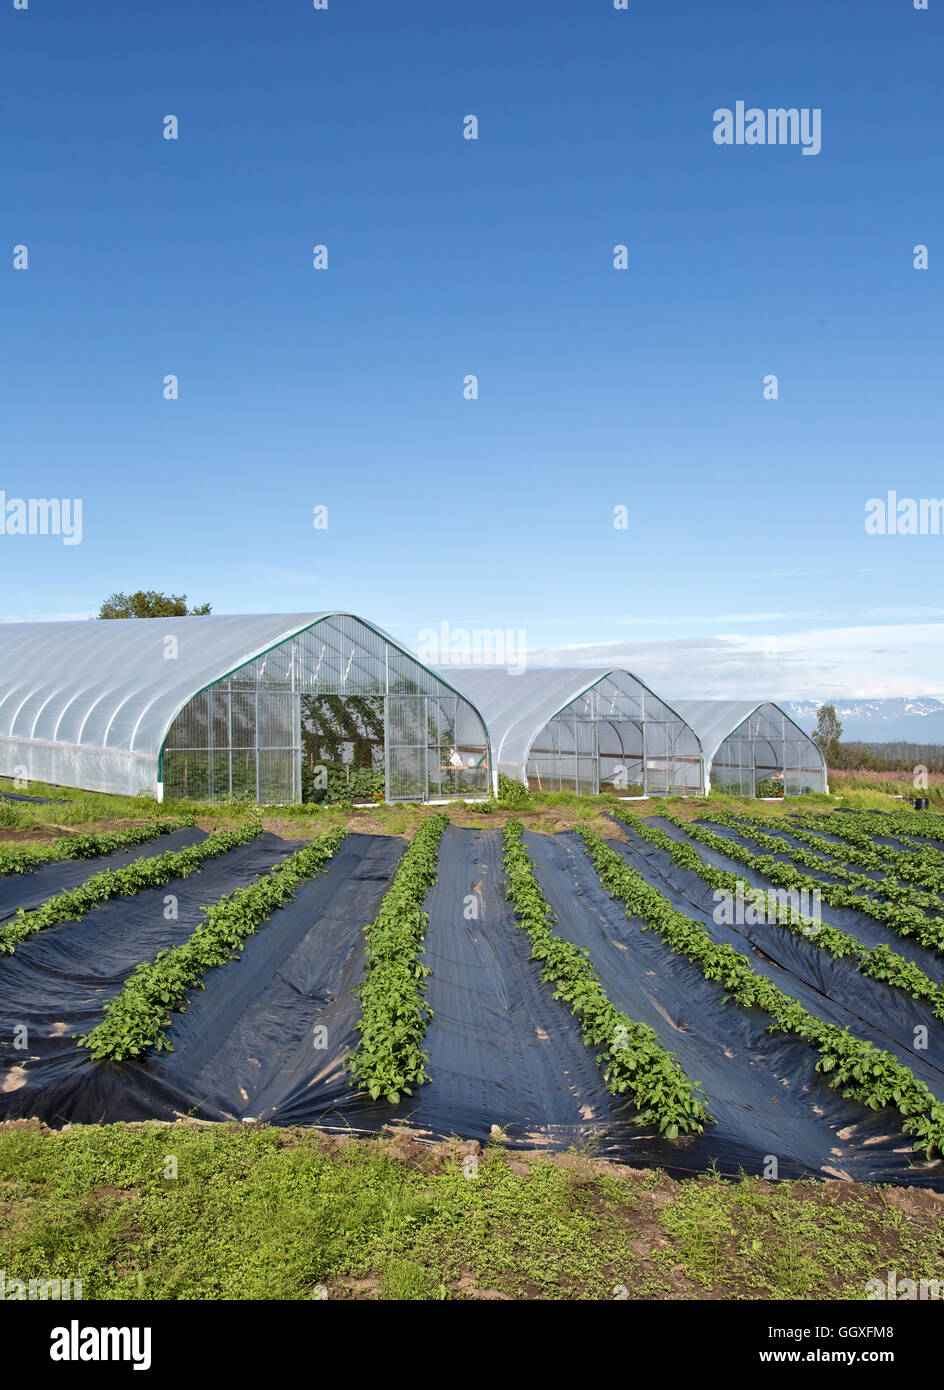 Tunnels, growing various vegetables,  hop & medicinal herbs, rows of potatoes in foreground. Stock Photo